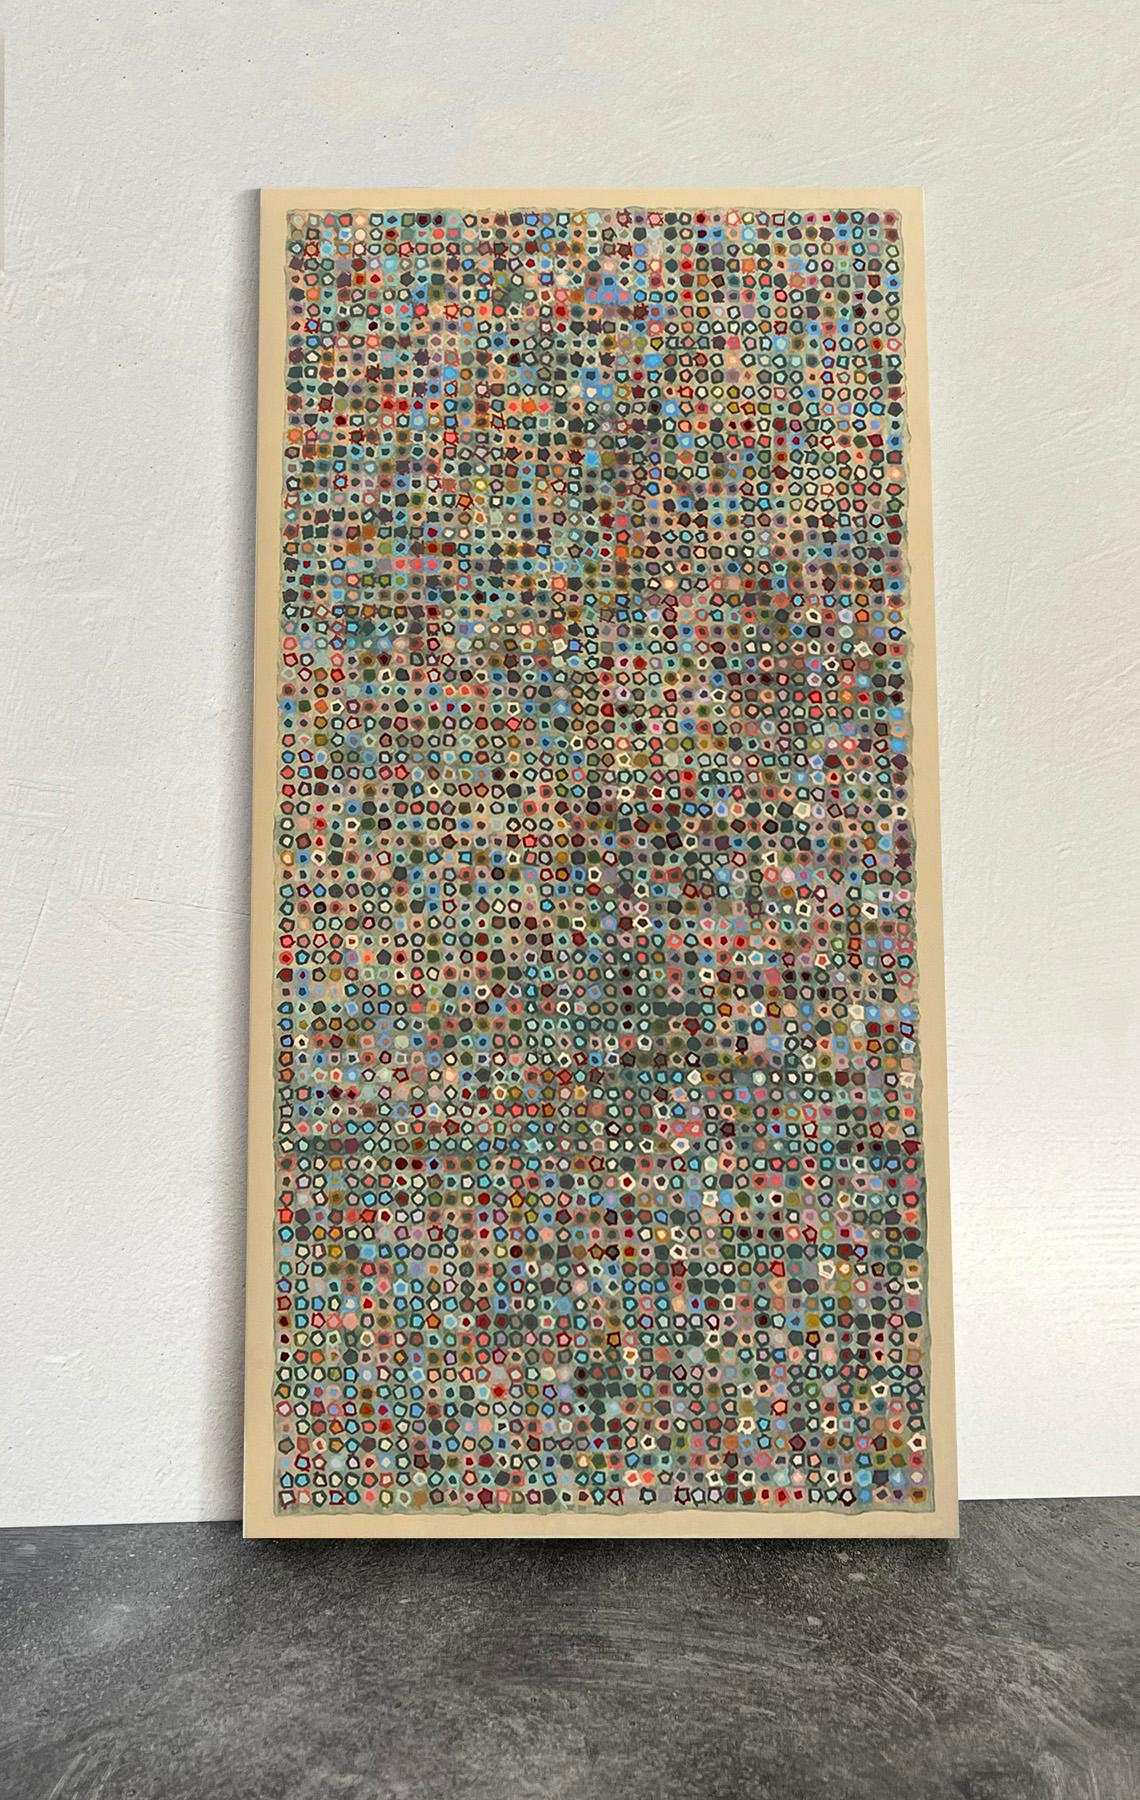 <p>Artist Comments<br>Artist Terri Bell presents a geometric abstract in gridded aggregations of bold colors. She uses organic brush patterns and color combinations to tightly weave an all-over lyrical pattern. â€œI was envisioning a flowery and